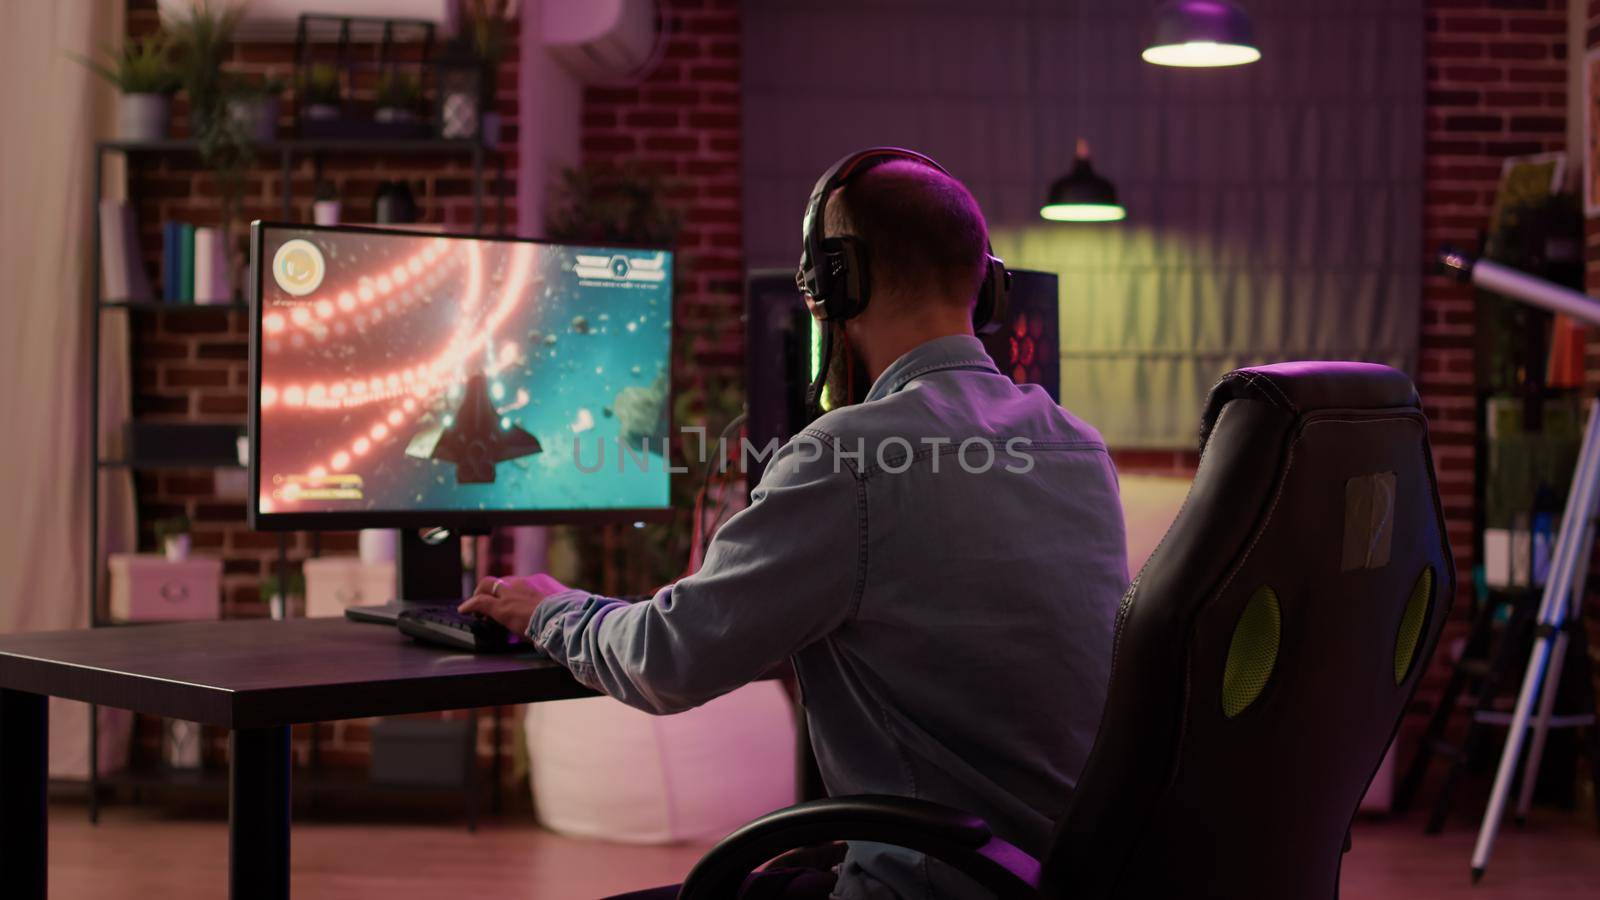 Over shoulder view of caucasian man using pc setup playing multiplayer online action game talking to team on headset. Gamer streaming fast paced space shooter while explaining gameplay to subscribers.